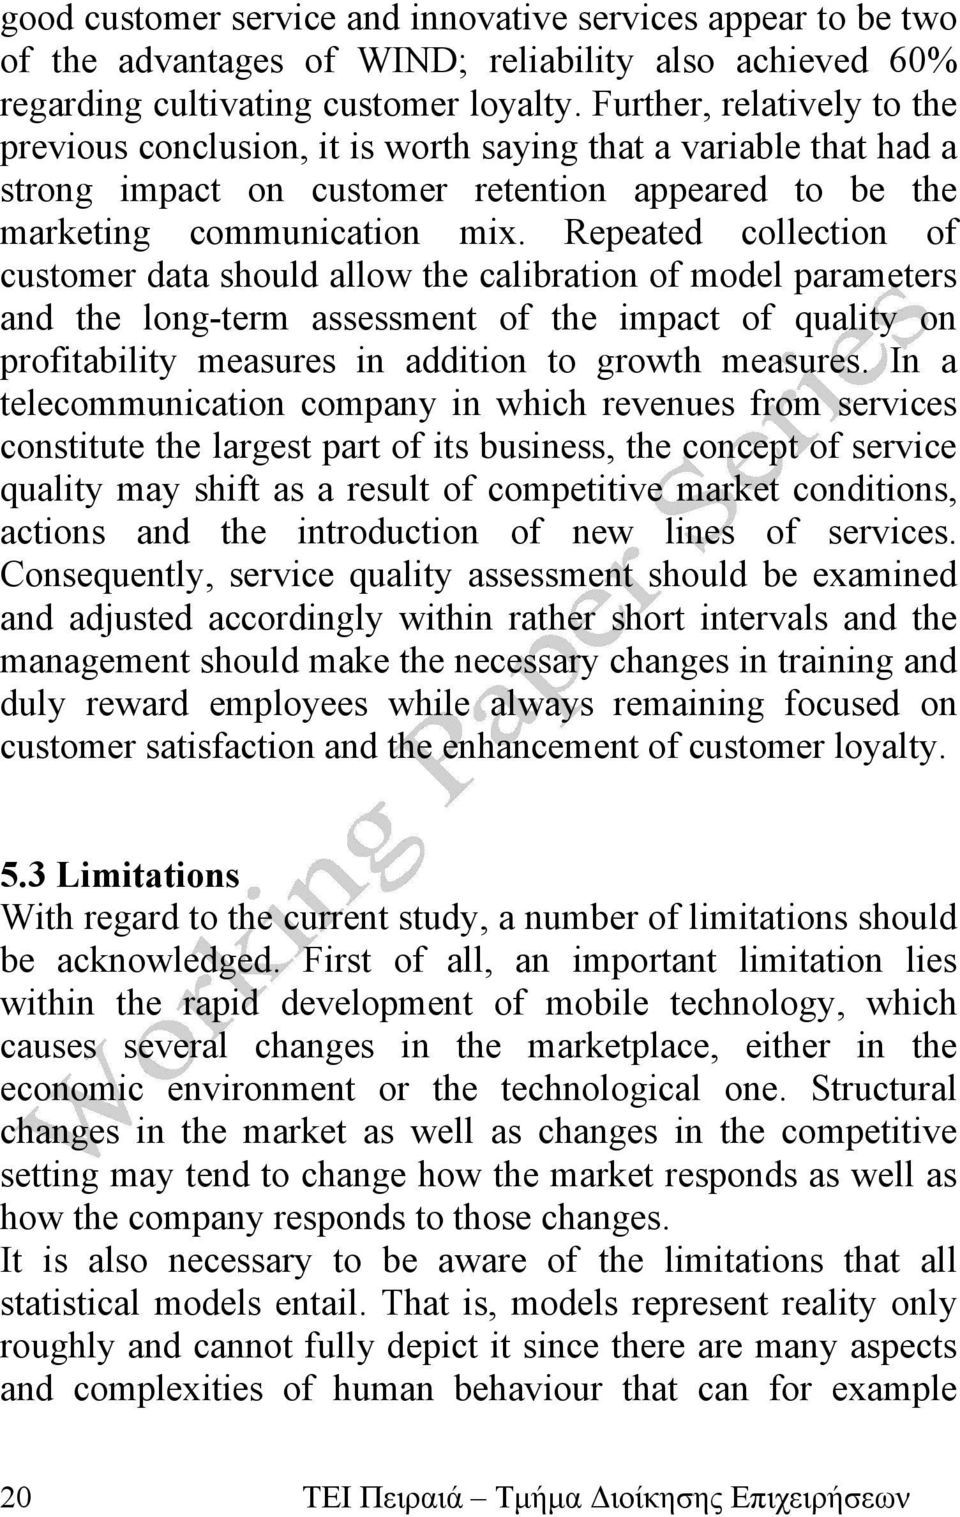 Repeated collection of customer data should allow the calibration of model parameters and the long-term assessment of the impact of quality on profitability measures in addition to growth measures.